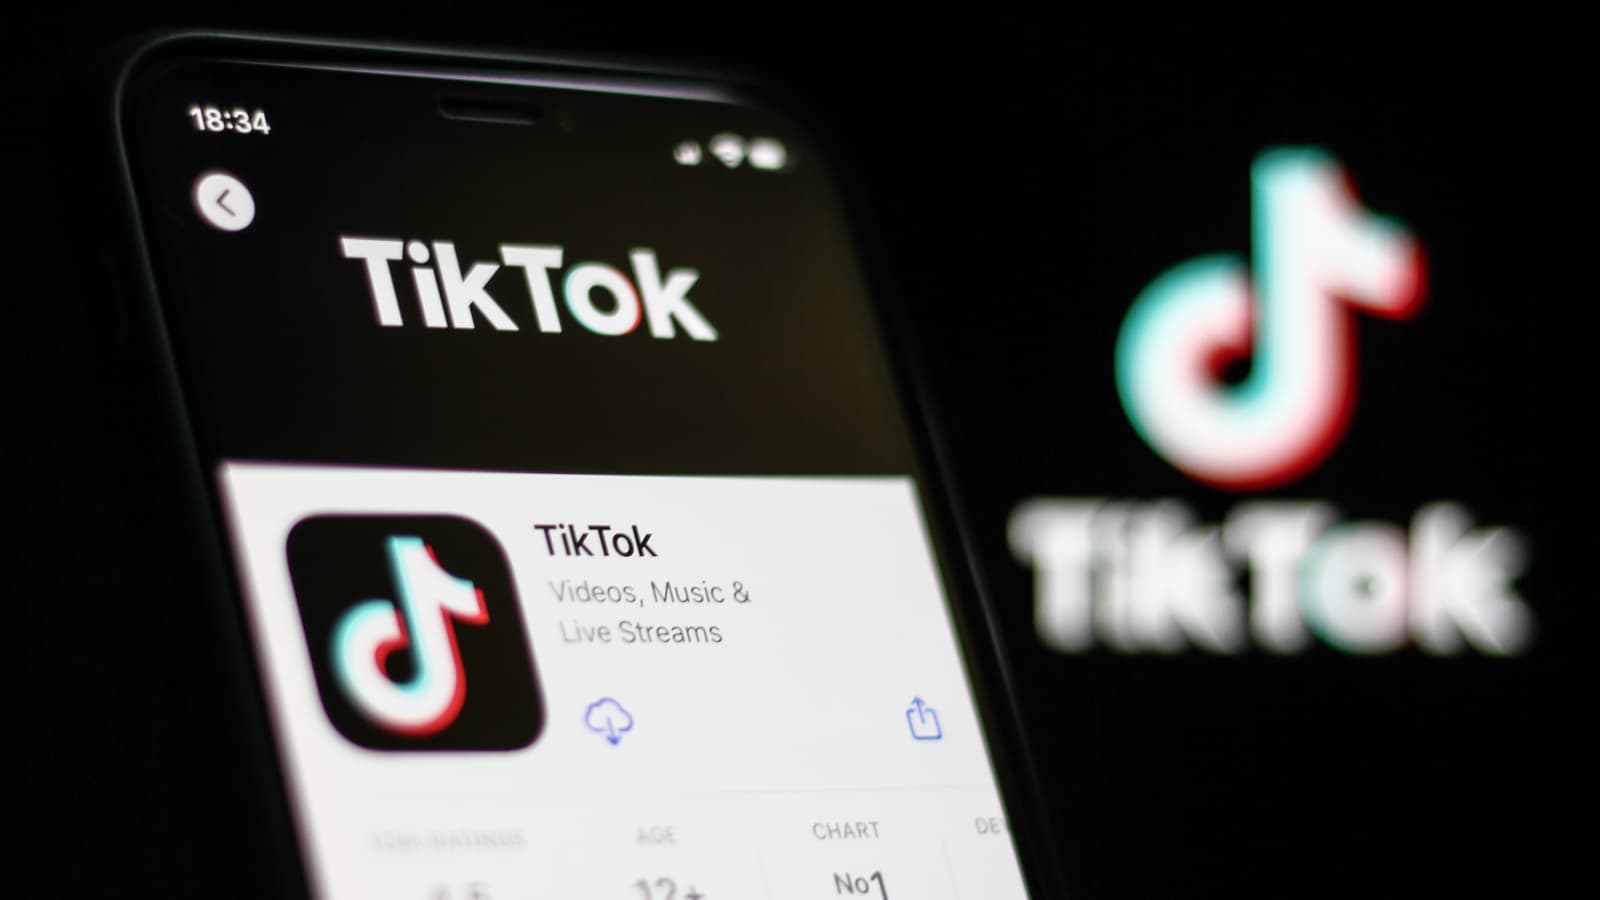 TikTok is testing a Repost button which is similar to Retweet button from Twitter